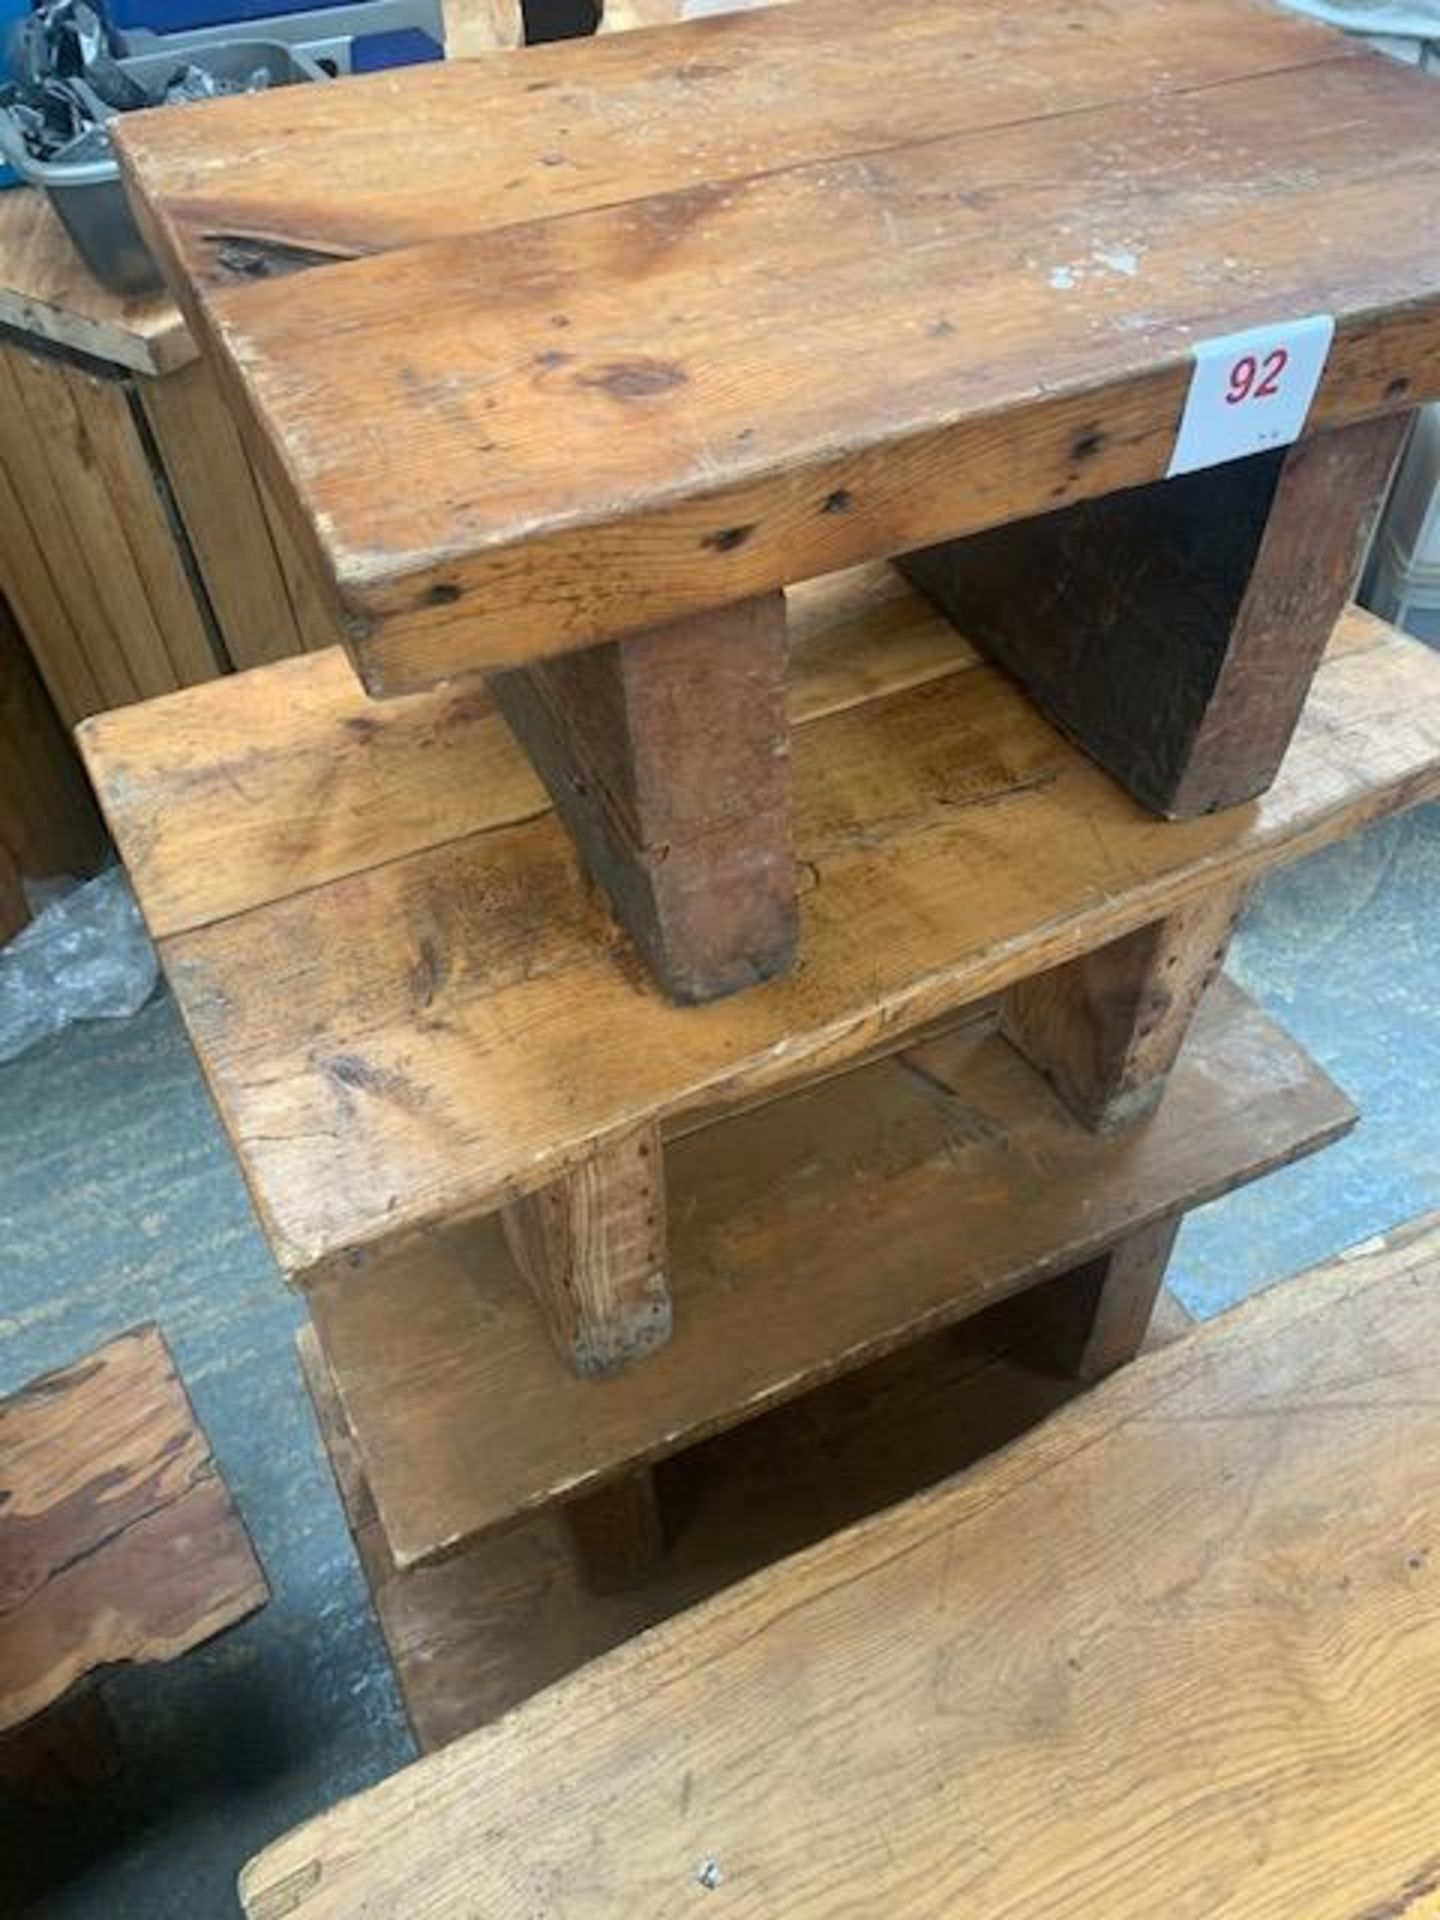 Four rustic solid oak tables/benches